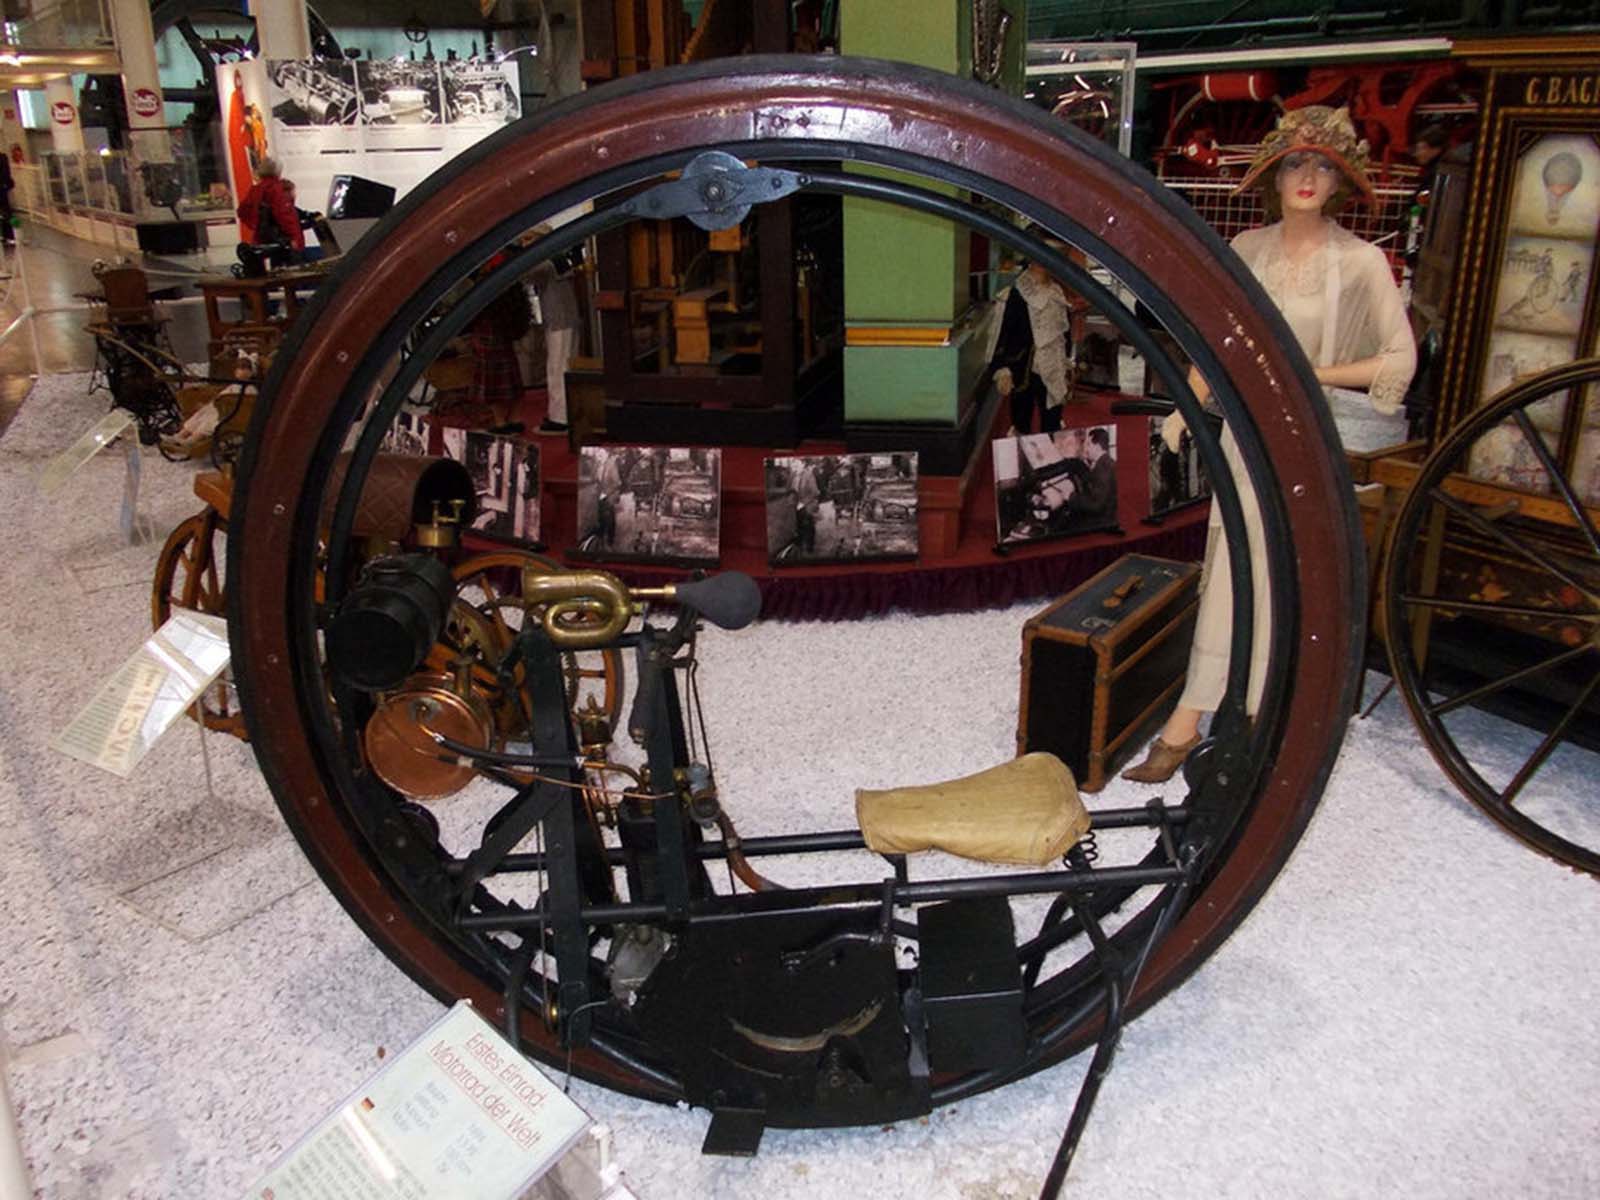 The Edison-Puton monowheel on display at the technical museum in Sinsheim, Germany.